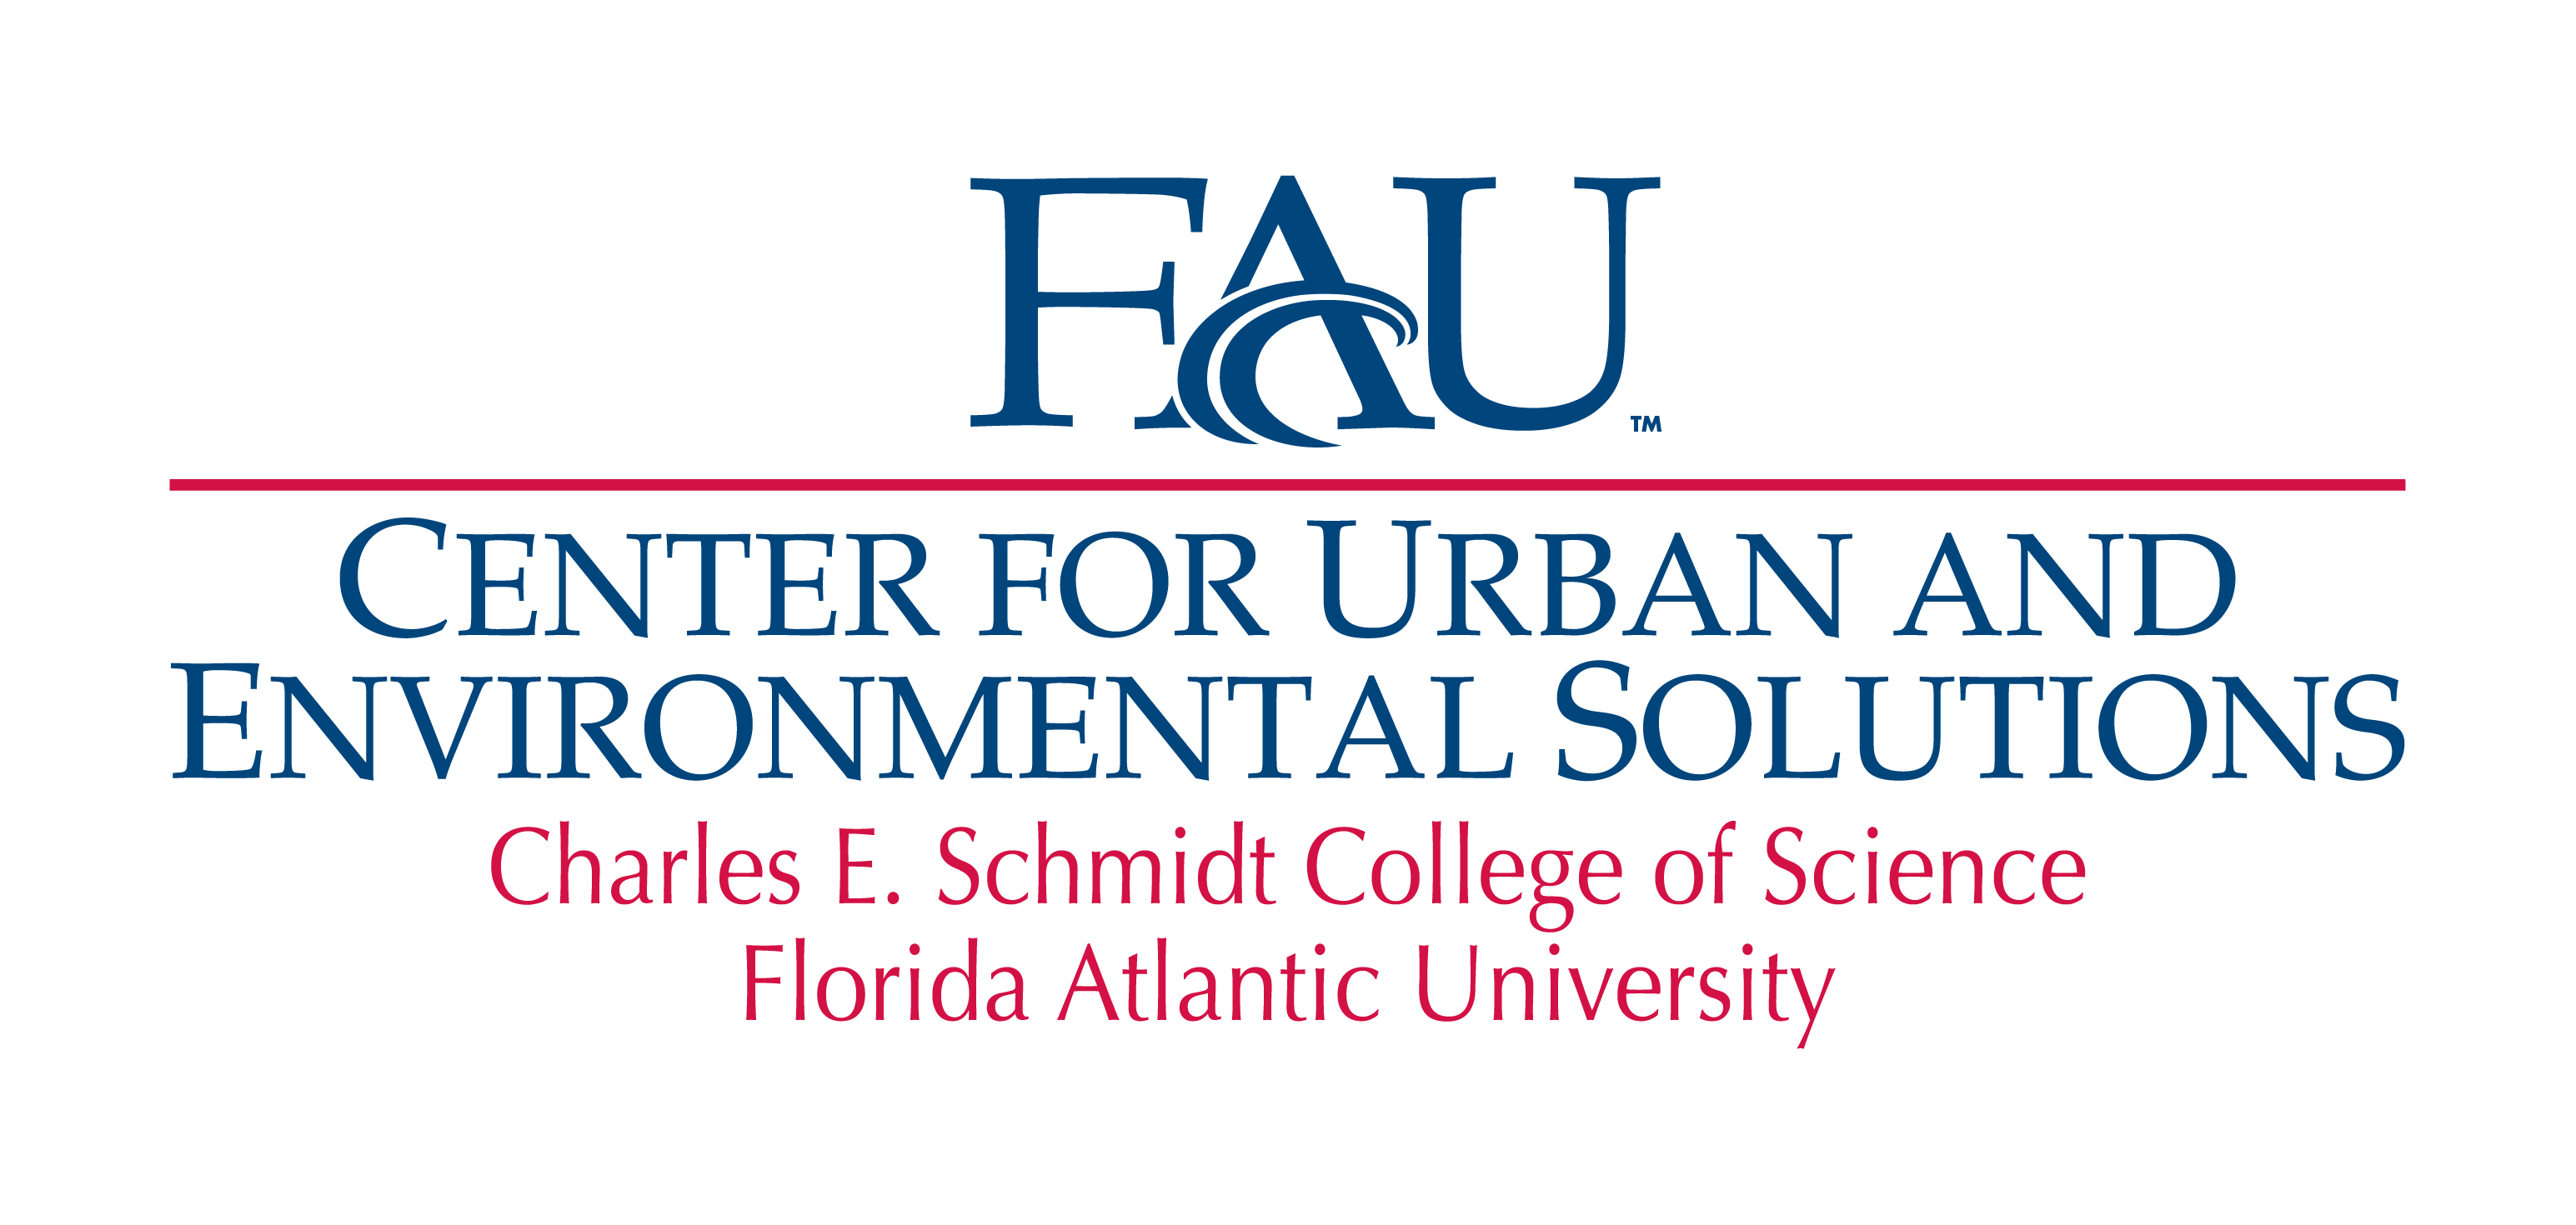 Center for Urban and Environmental Solutions (CUES) wordmark